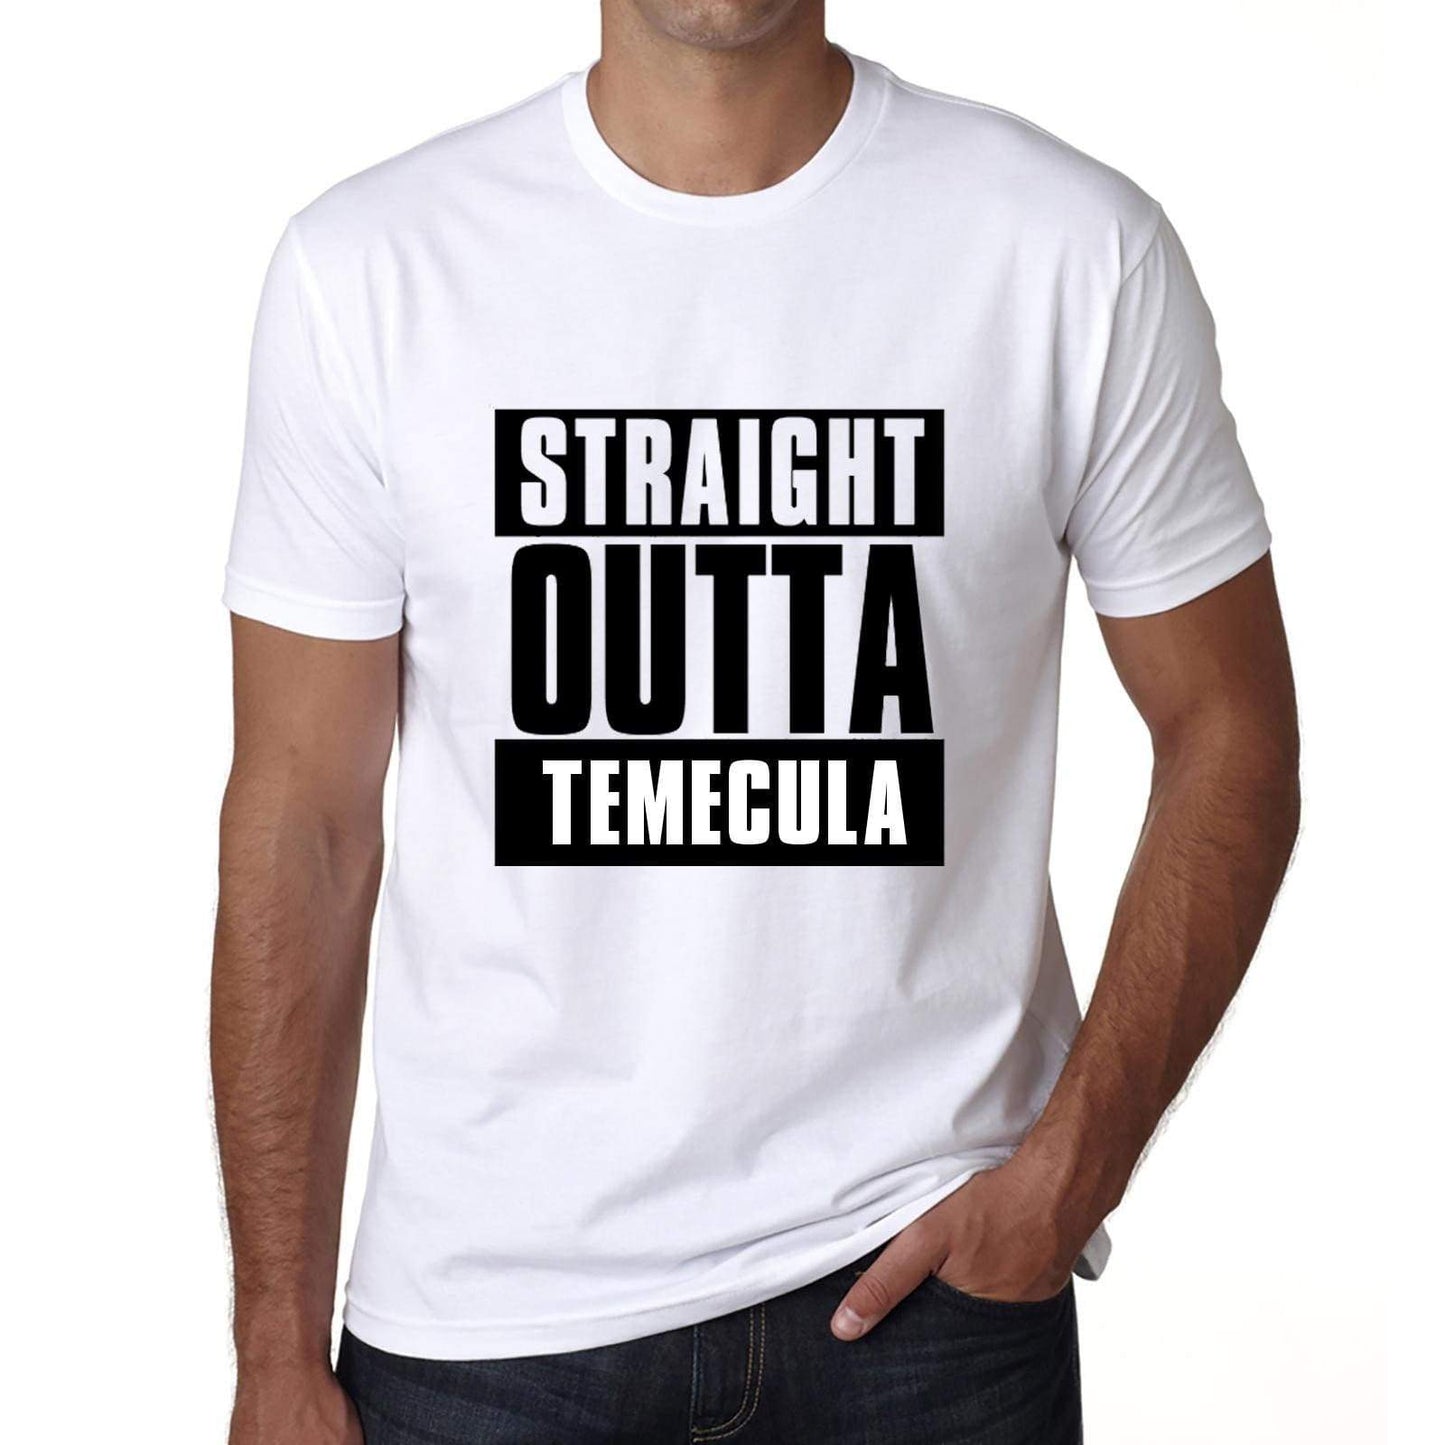 Straight Outta Temecula Mens Short Sleeve Round Neck T-Shirt 00027 - White / S - Casual